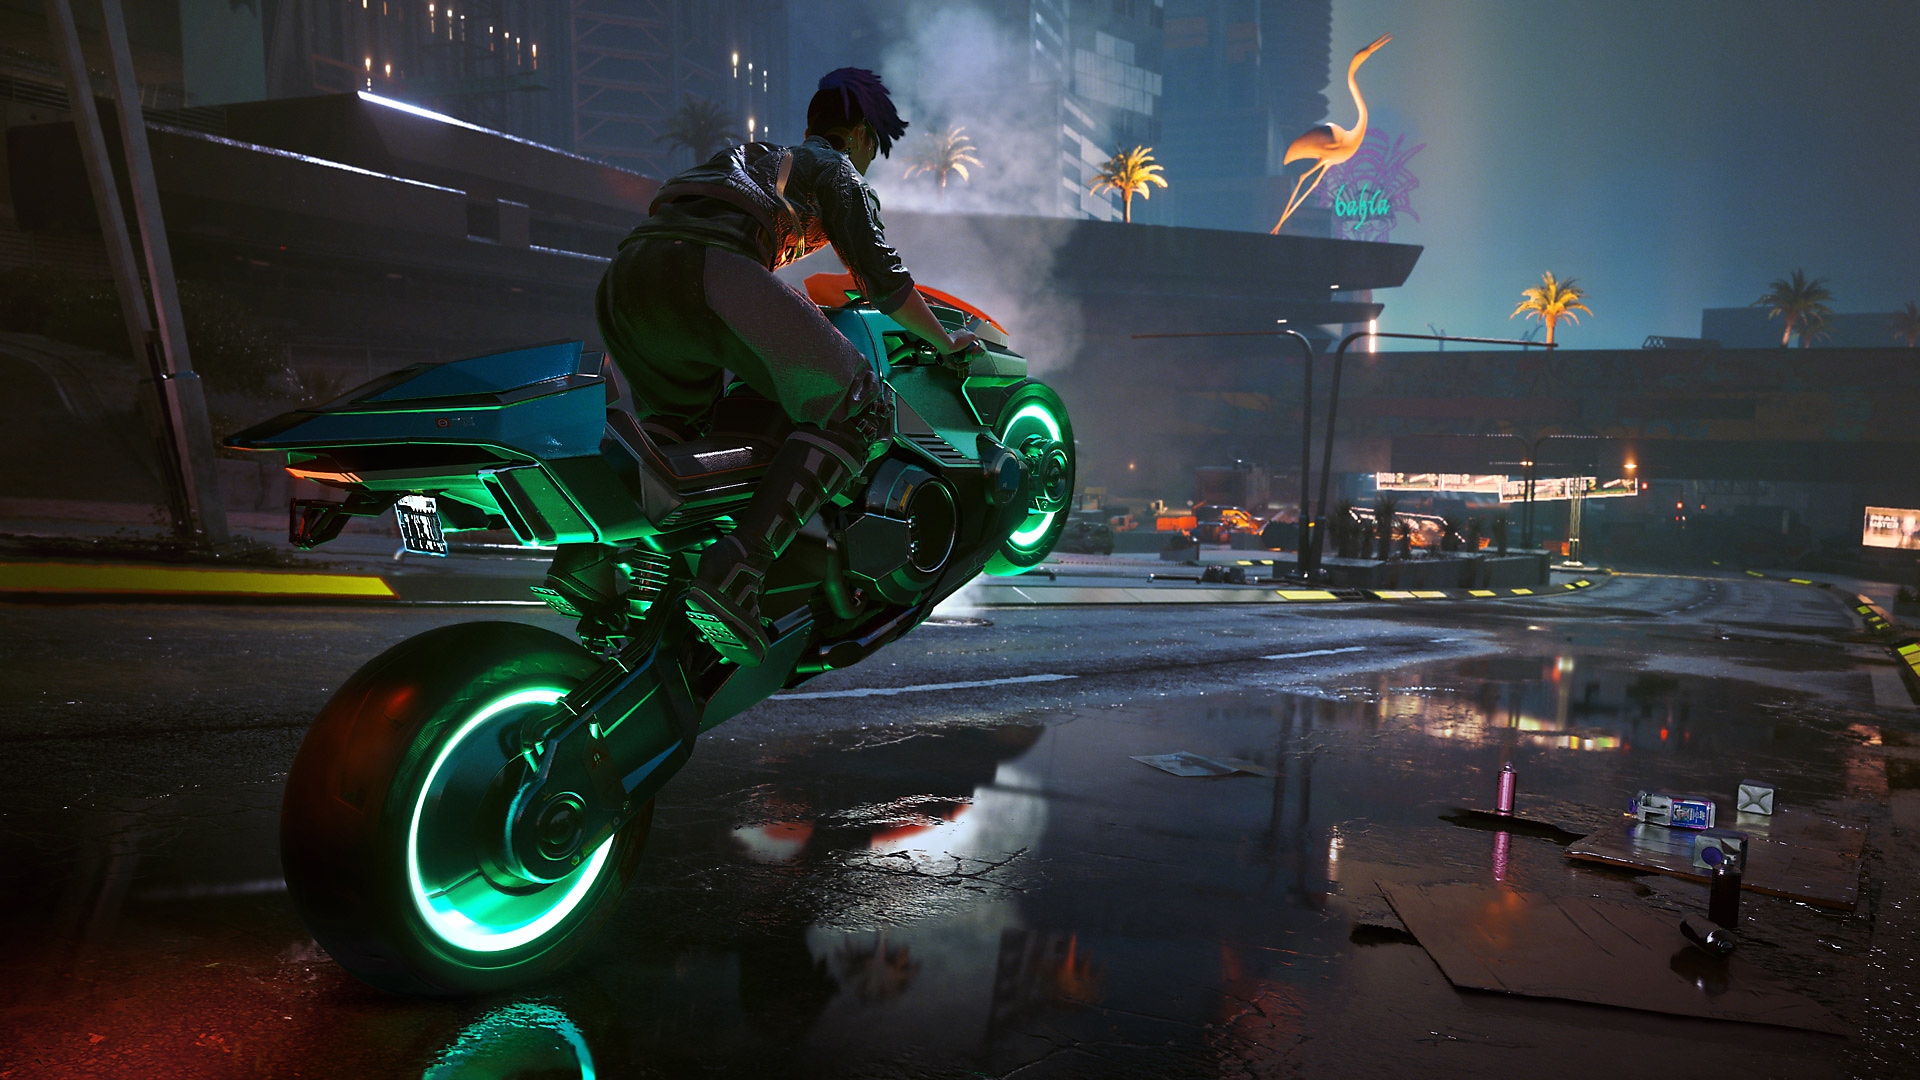 Cyberpunk 2077: Edgerunners update showing a character pulling a wheelie on a motorbike with glowing green wheels